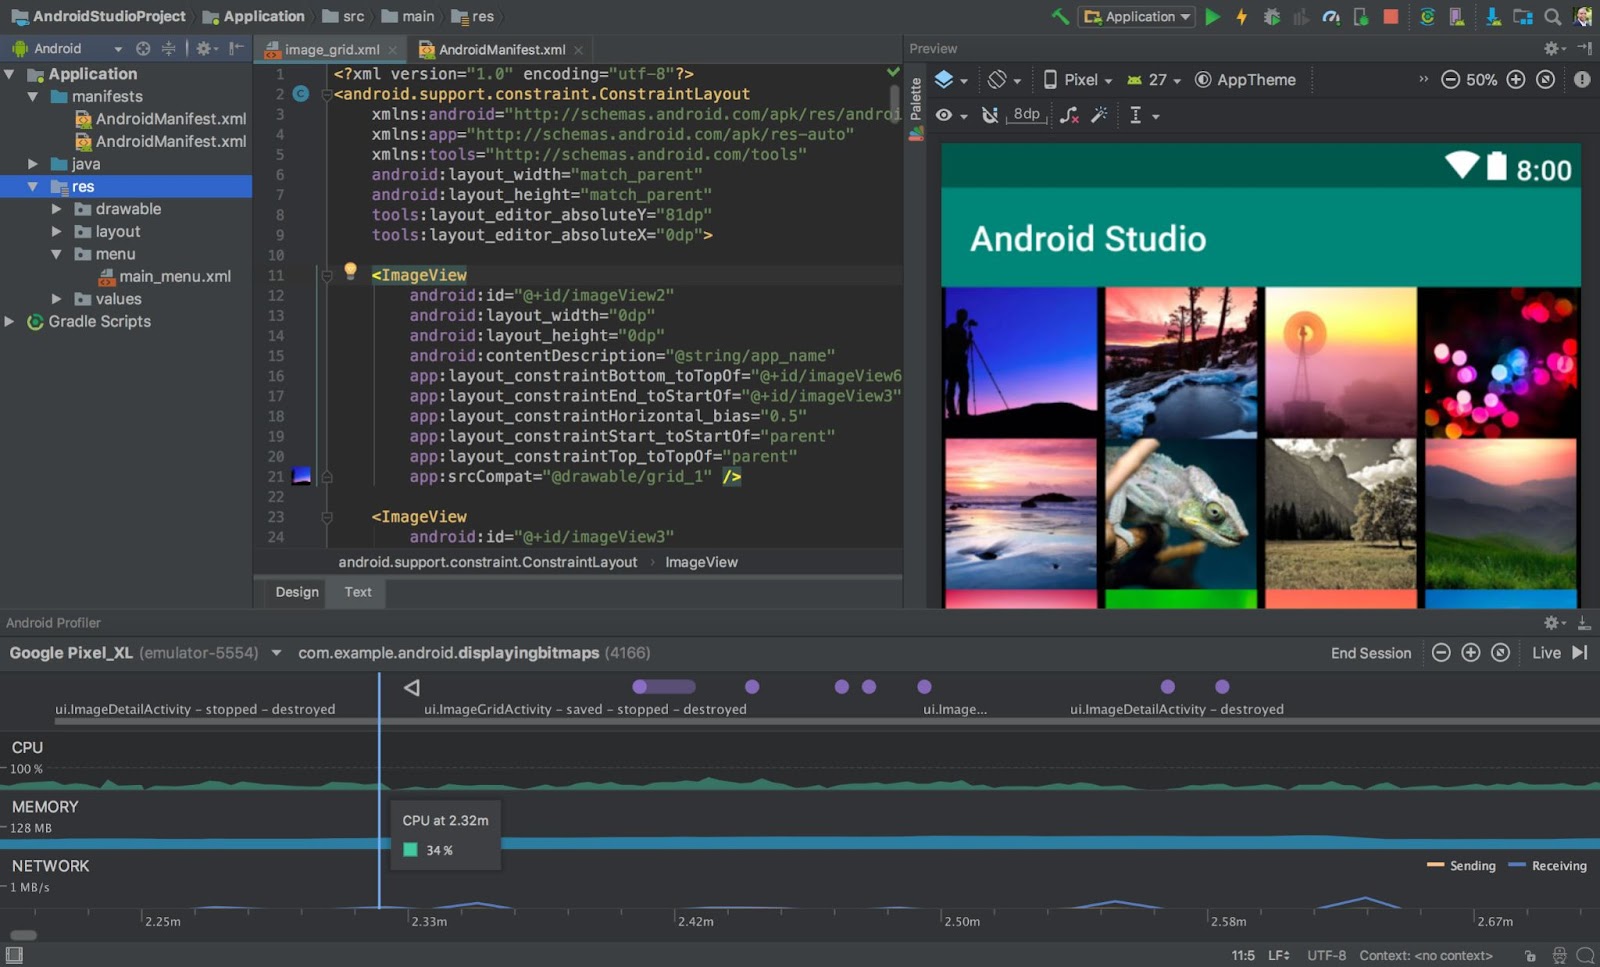 Android Studio as a great Android development tool.